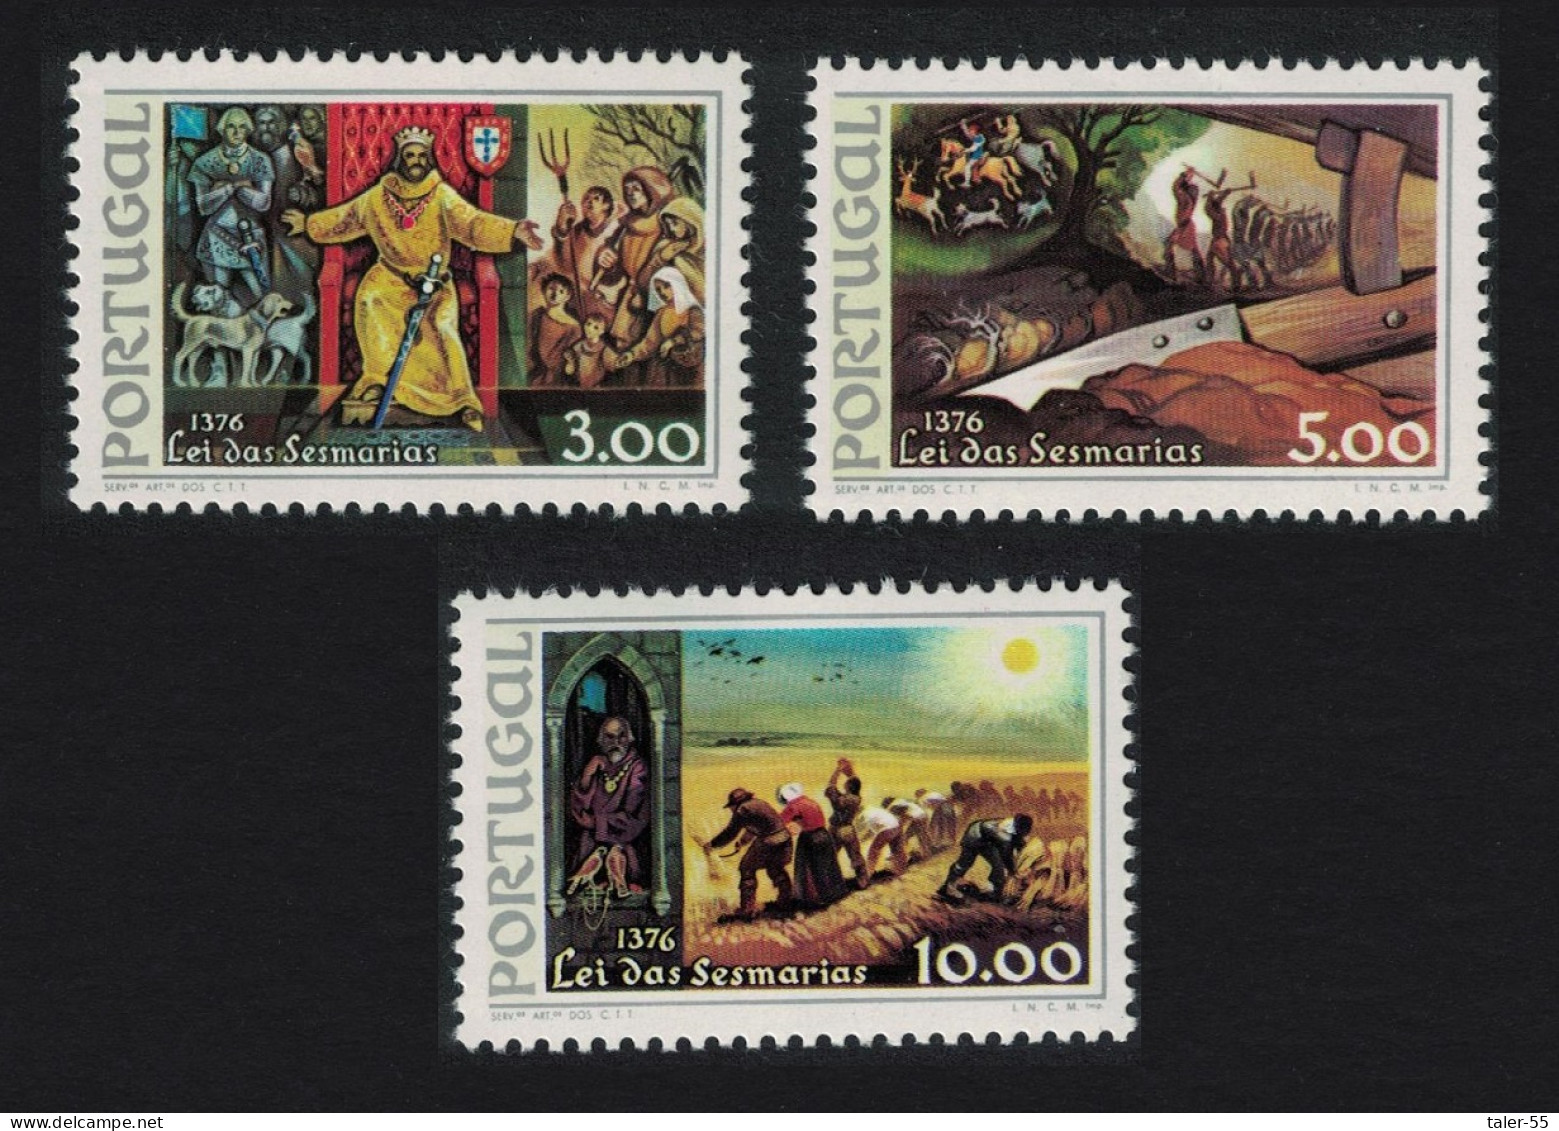 Portugal 600th Anniversary Of Law Of 'Sesmarias' Uncultivated Land 3v 1976 MNH SG#1606-1608 - Unused Stamps